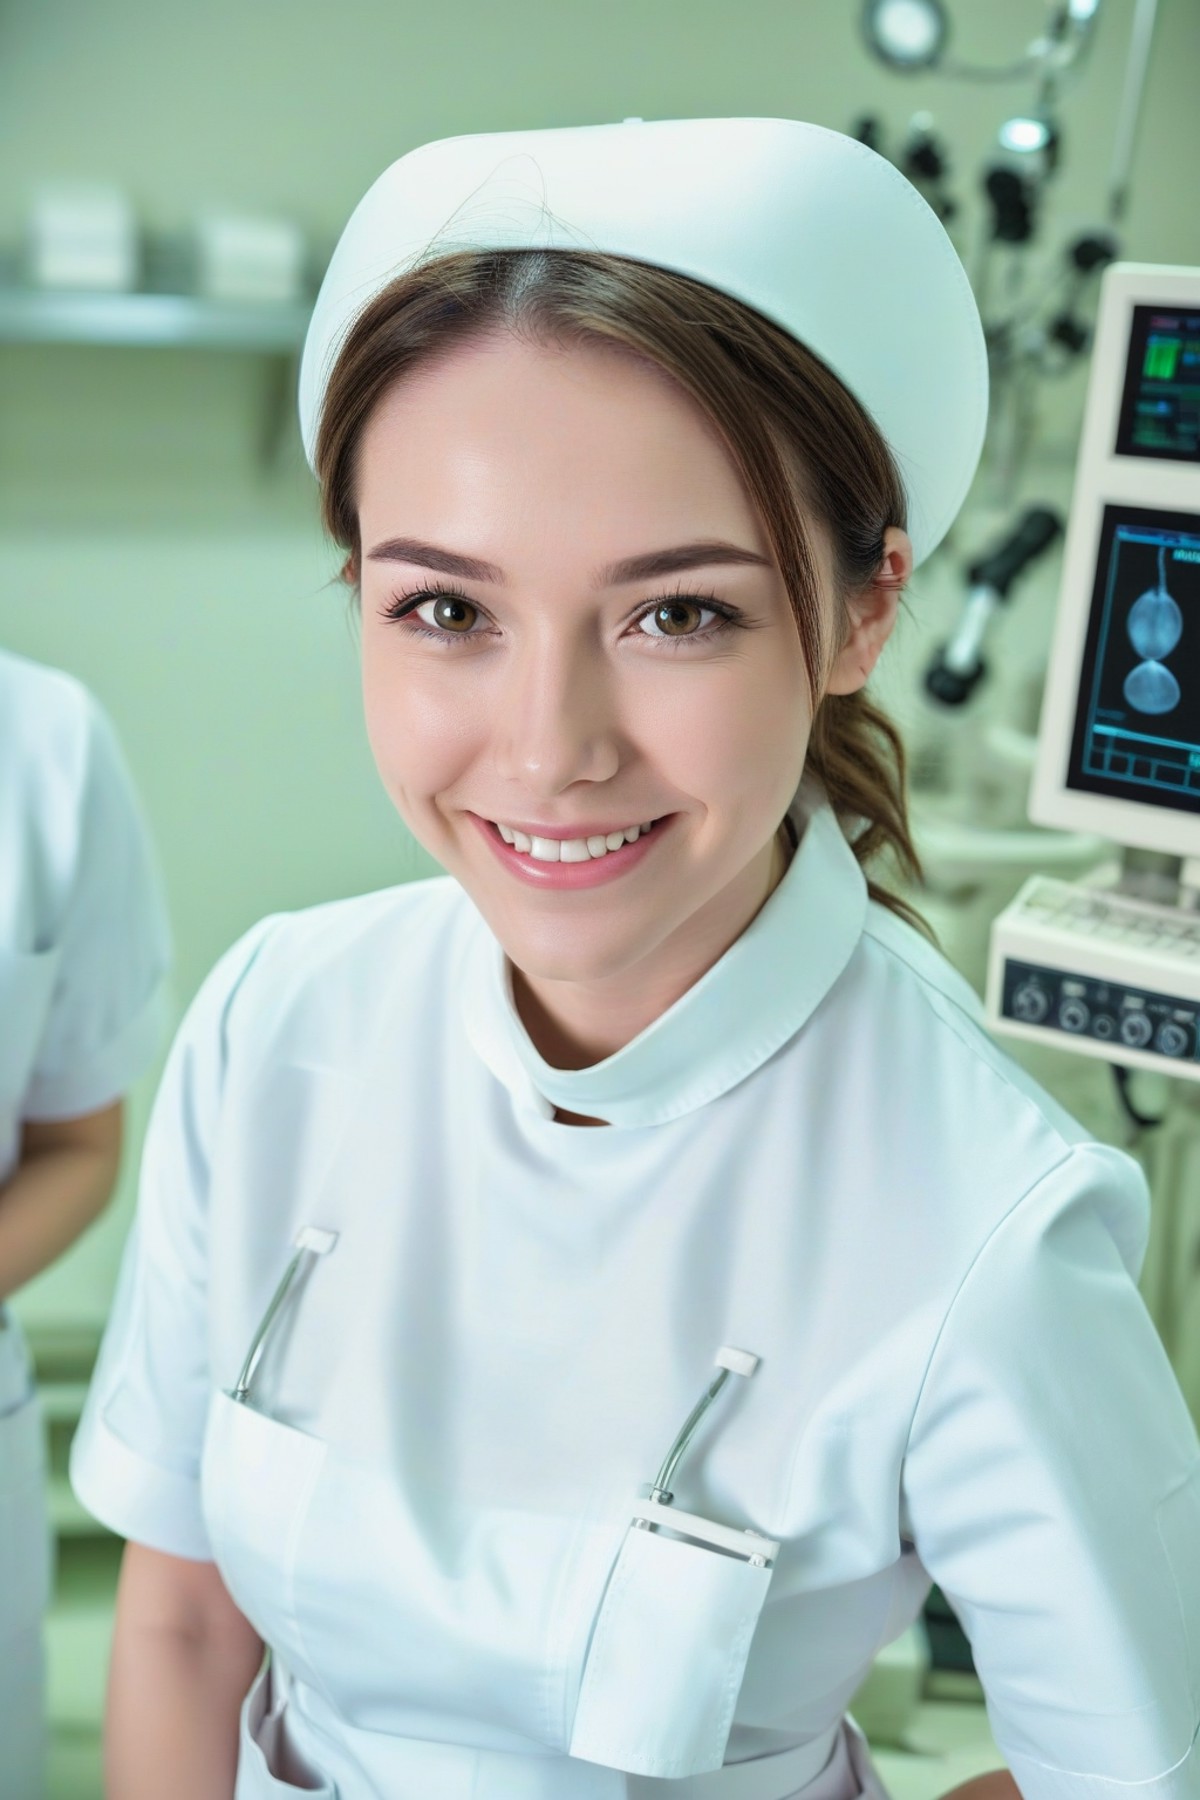 Inside a modern operating room, a young nurse wears white nurse uniform with nurse cap, with a gentle smile on the face.
 ...